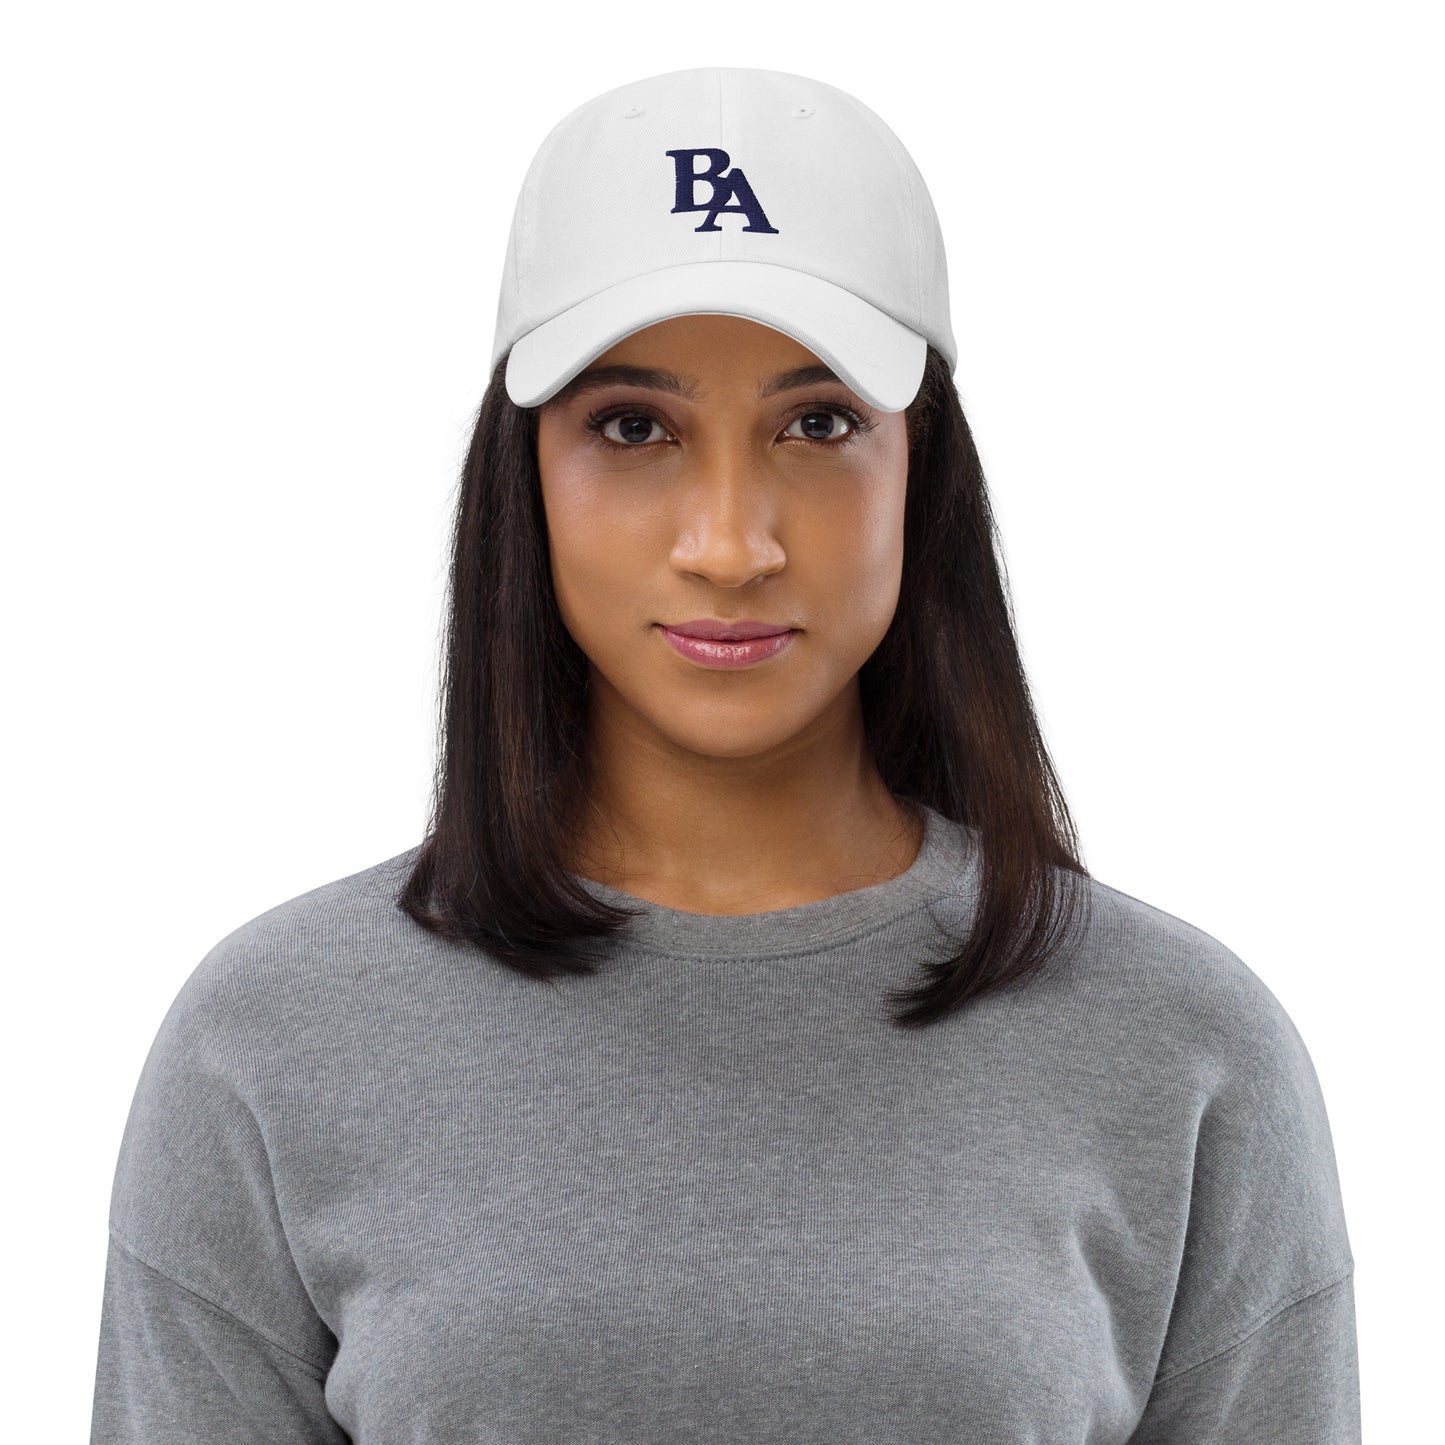 Women's Embroidered Cap